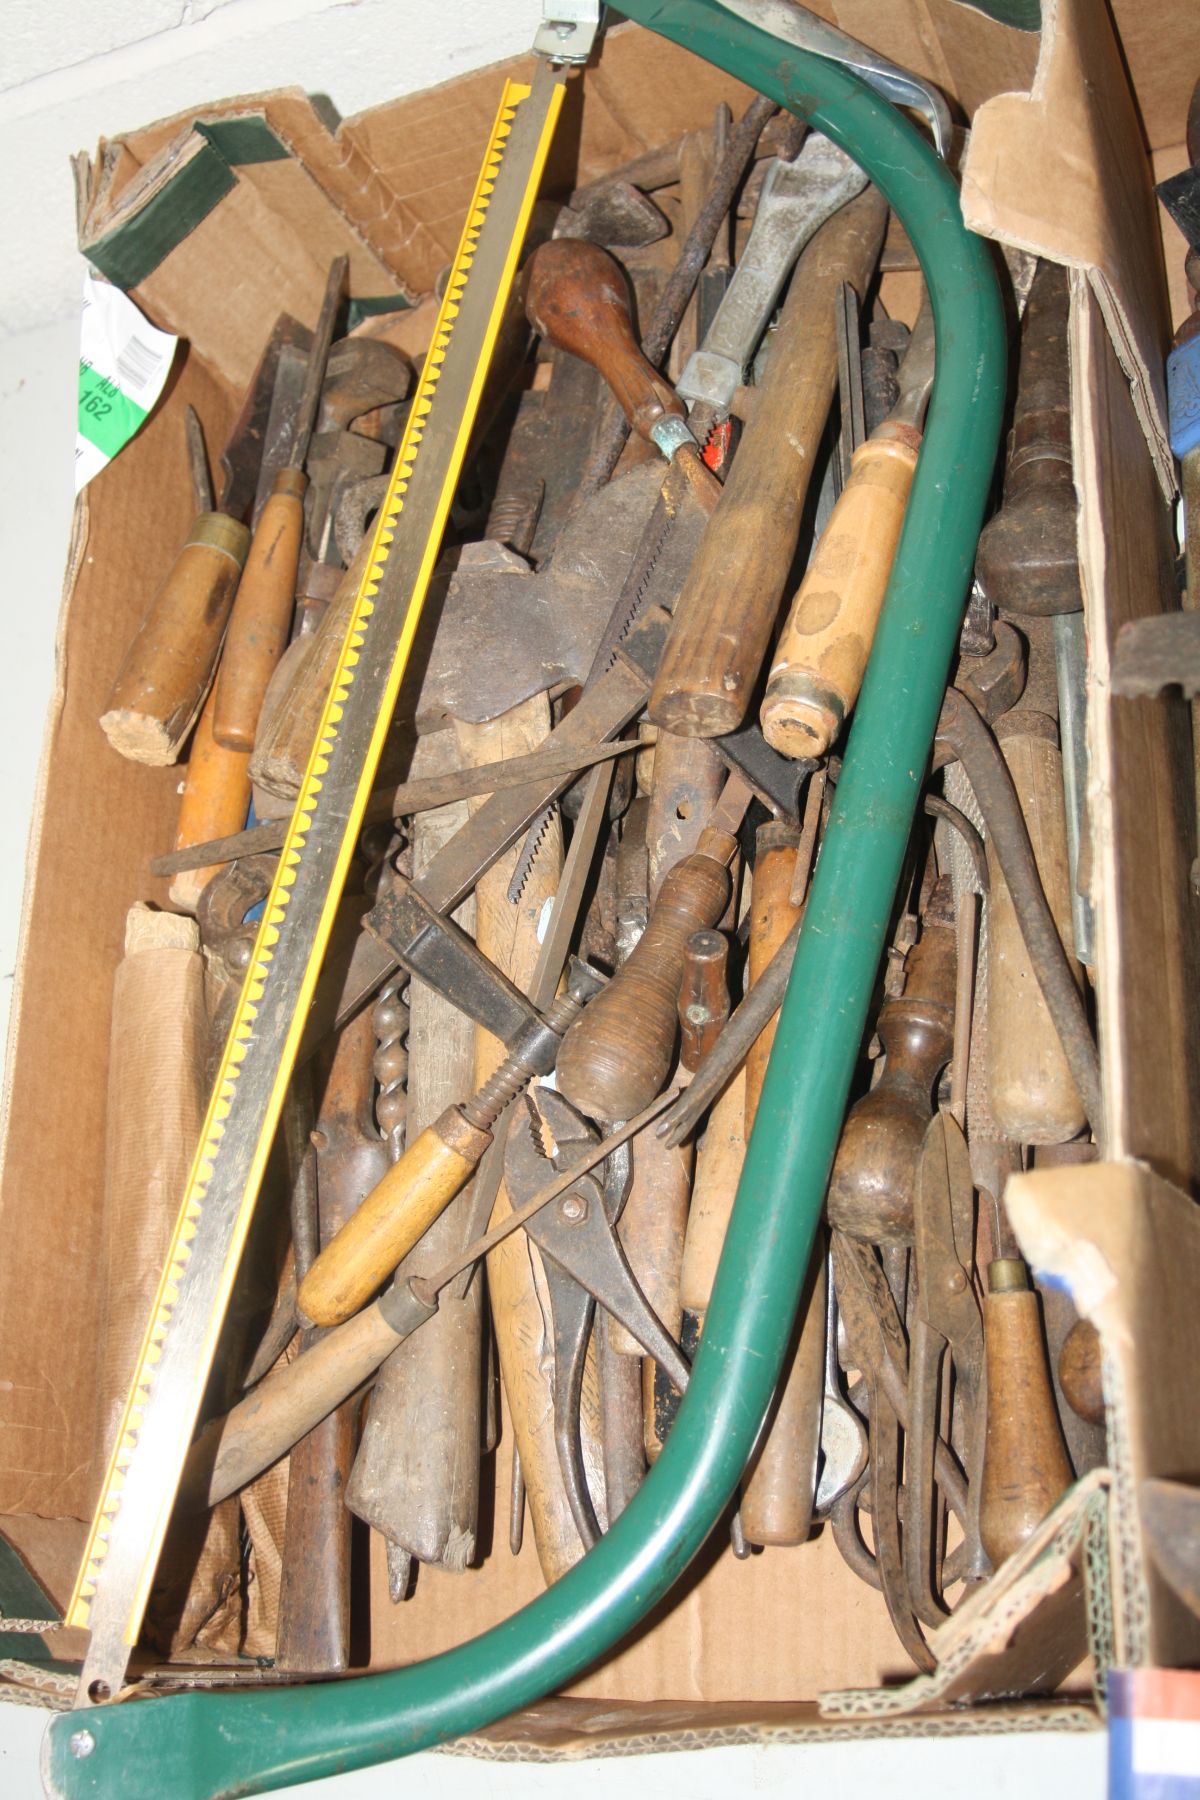 FIVE BOXES OF VARIOUS HAND TOOLS, to include planes, saws, hand sythes, files, chizels, hammers, - Image 10 of 14